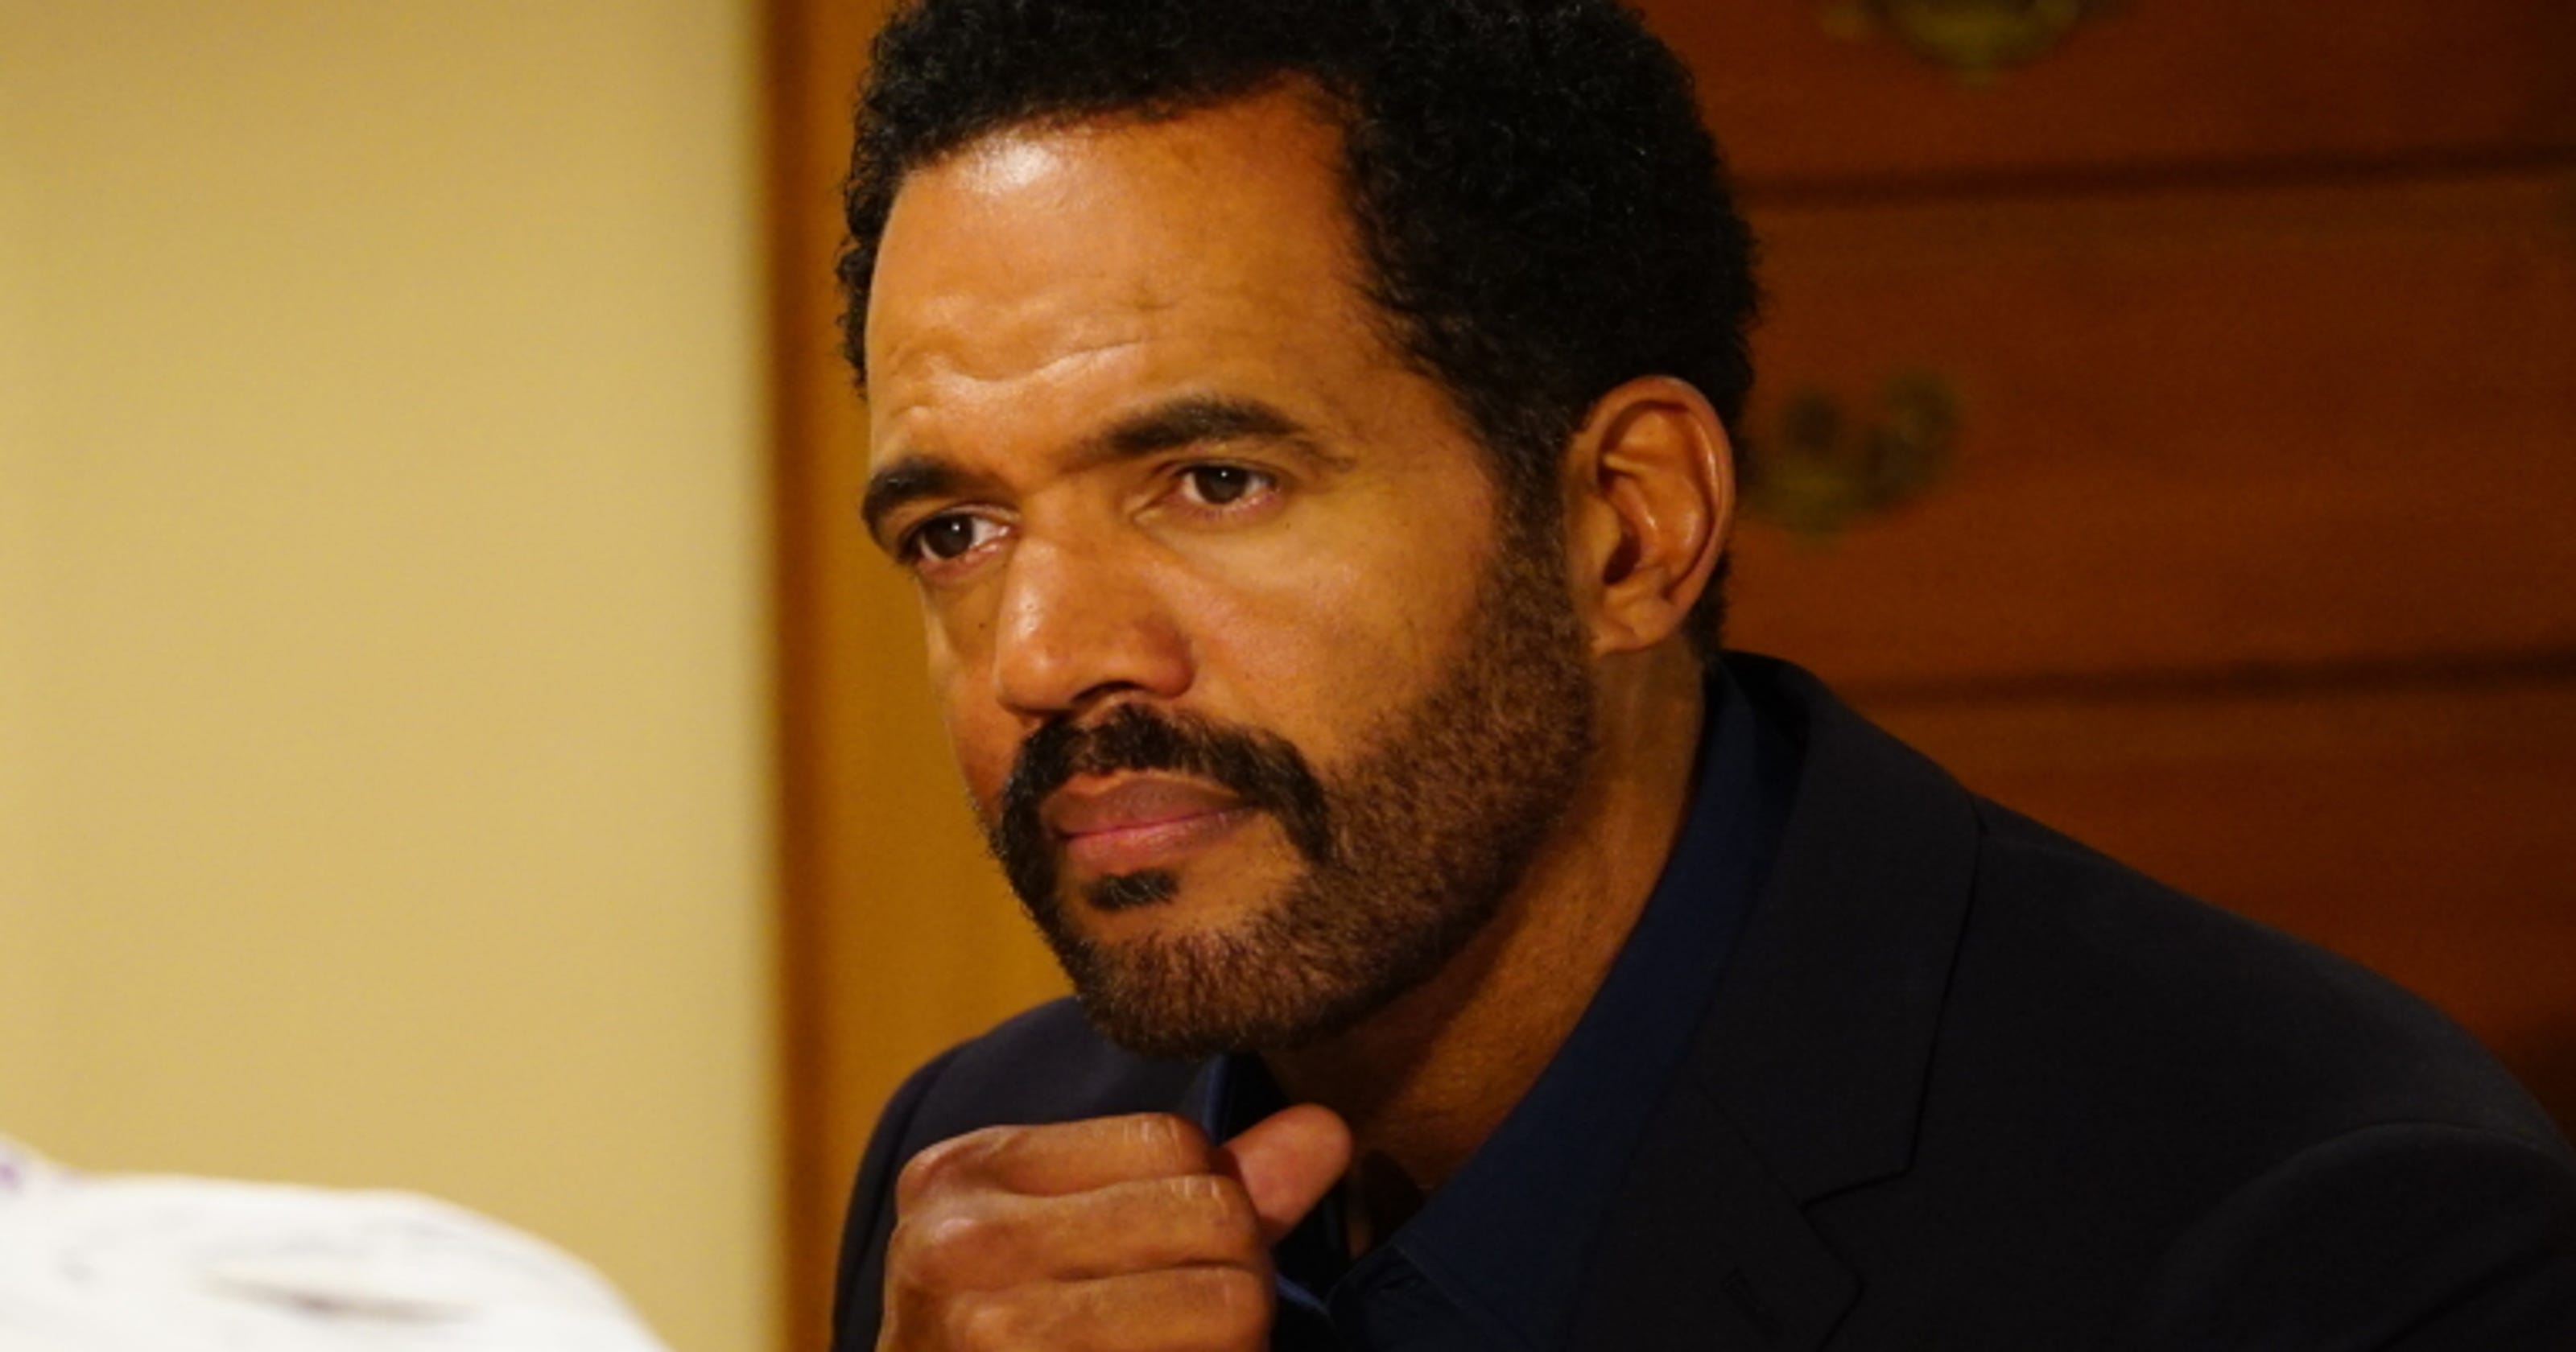 Kristoff St John Young And The Restless Star Dead At 52 - 